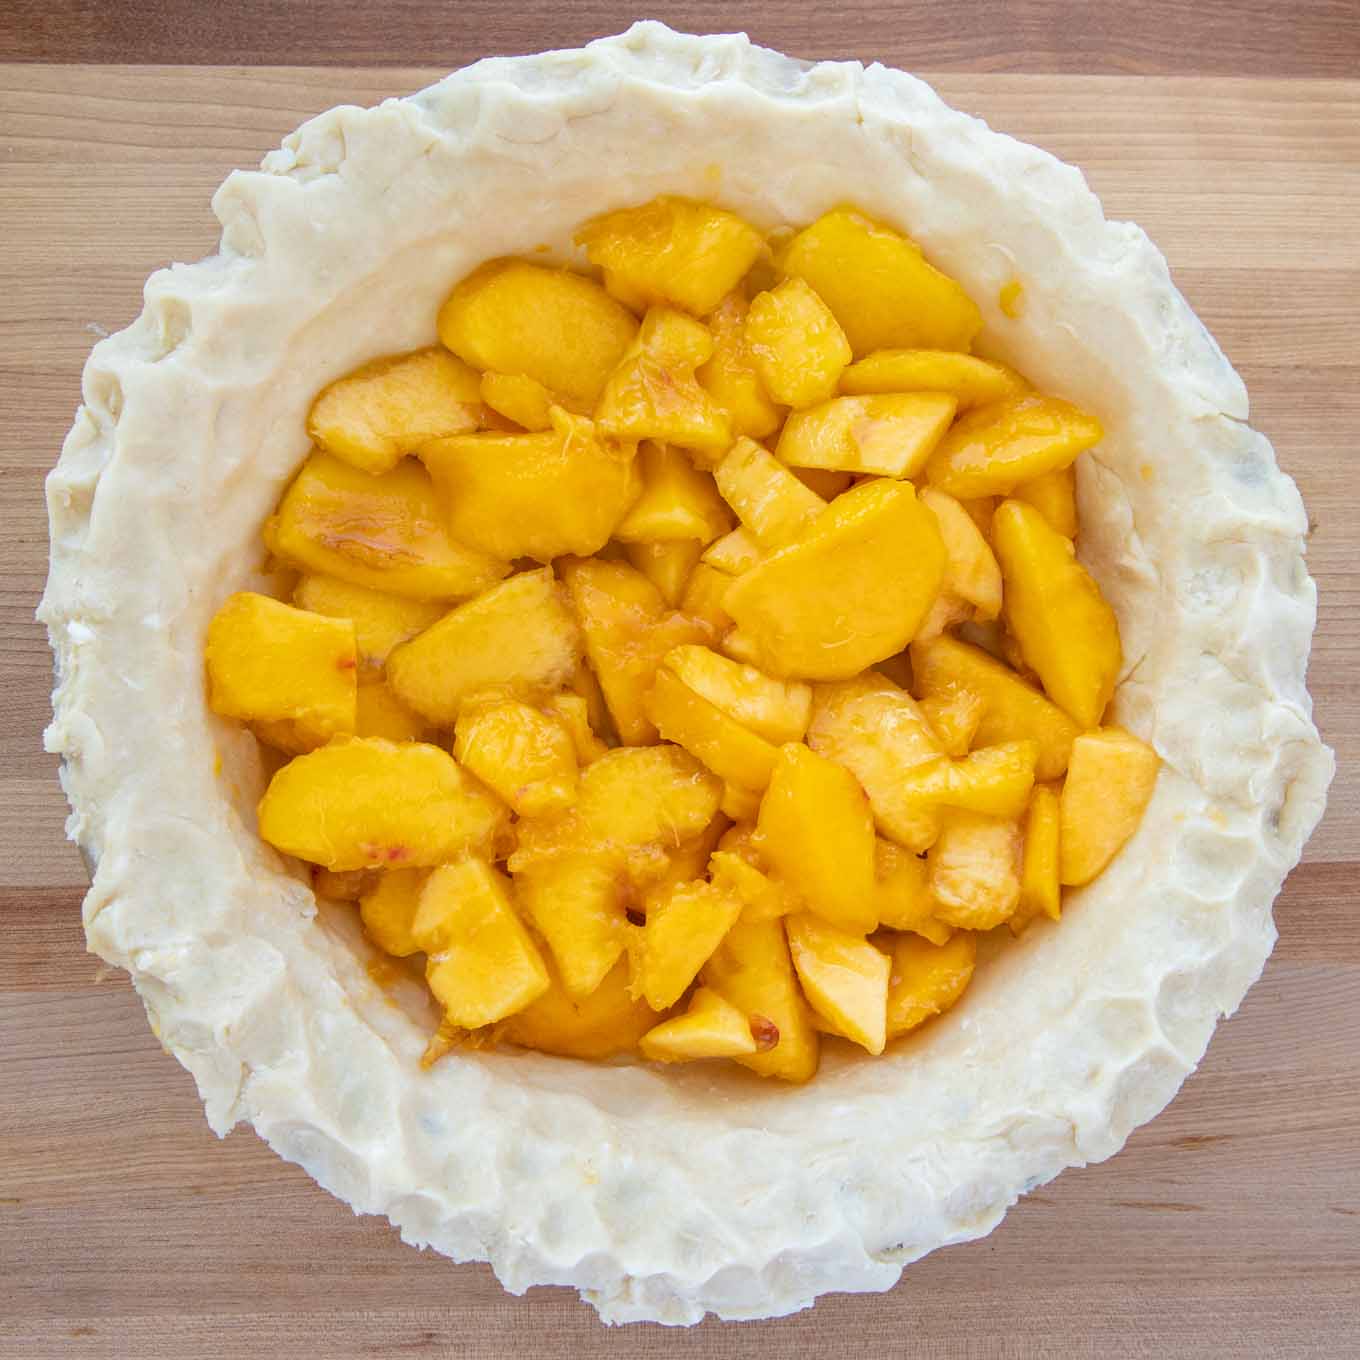 Pie crust in a glass pie pan with a layer of sliced peaches in the pie shell